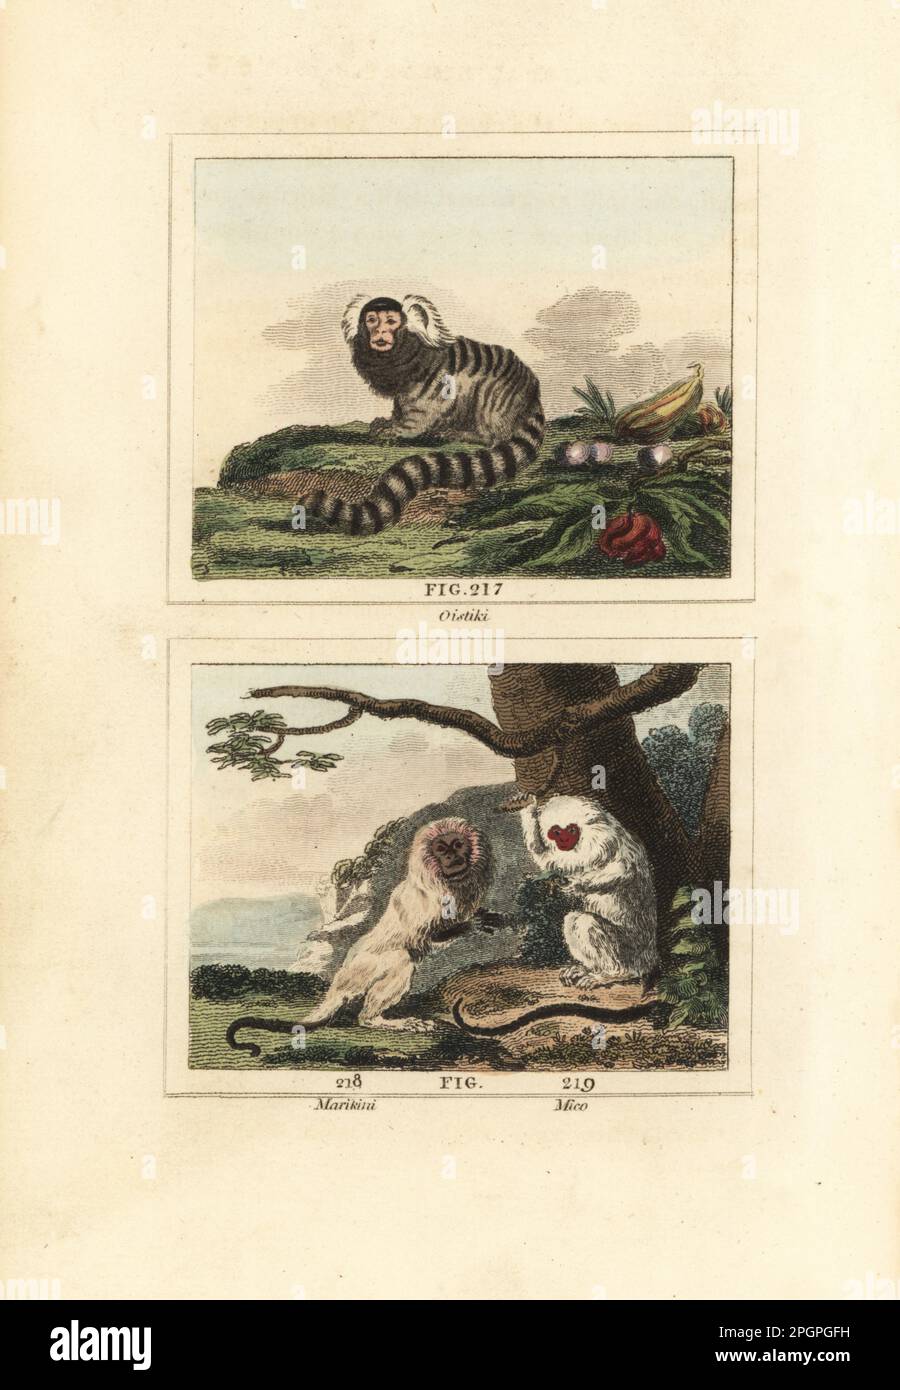 Common marmoset, Callithrix jacchus 217, white-mantled tamarin, Saguinus melanoleucus 218, and silvery marmoset, Mico argentatus 219. Oistiki or ouistiti, marikini or marikina, mico. Handcoloured copperplate engraving after Jacques de Seve from James Smith Barr’s edition of Comte Buffon’s Natural History, A Theory of the Earth, General History of Man, Brute Creation, Vegetables, Minerals, T. Gillet, H. D. Symonds, Paternoster Row, London, 1807. Stock Photo